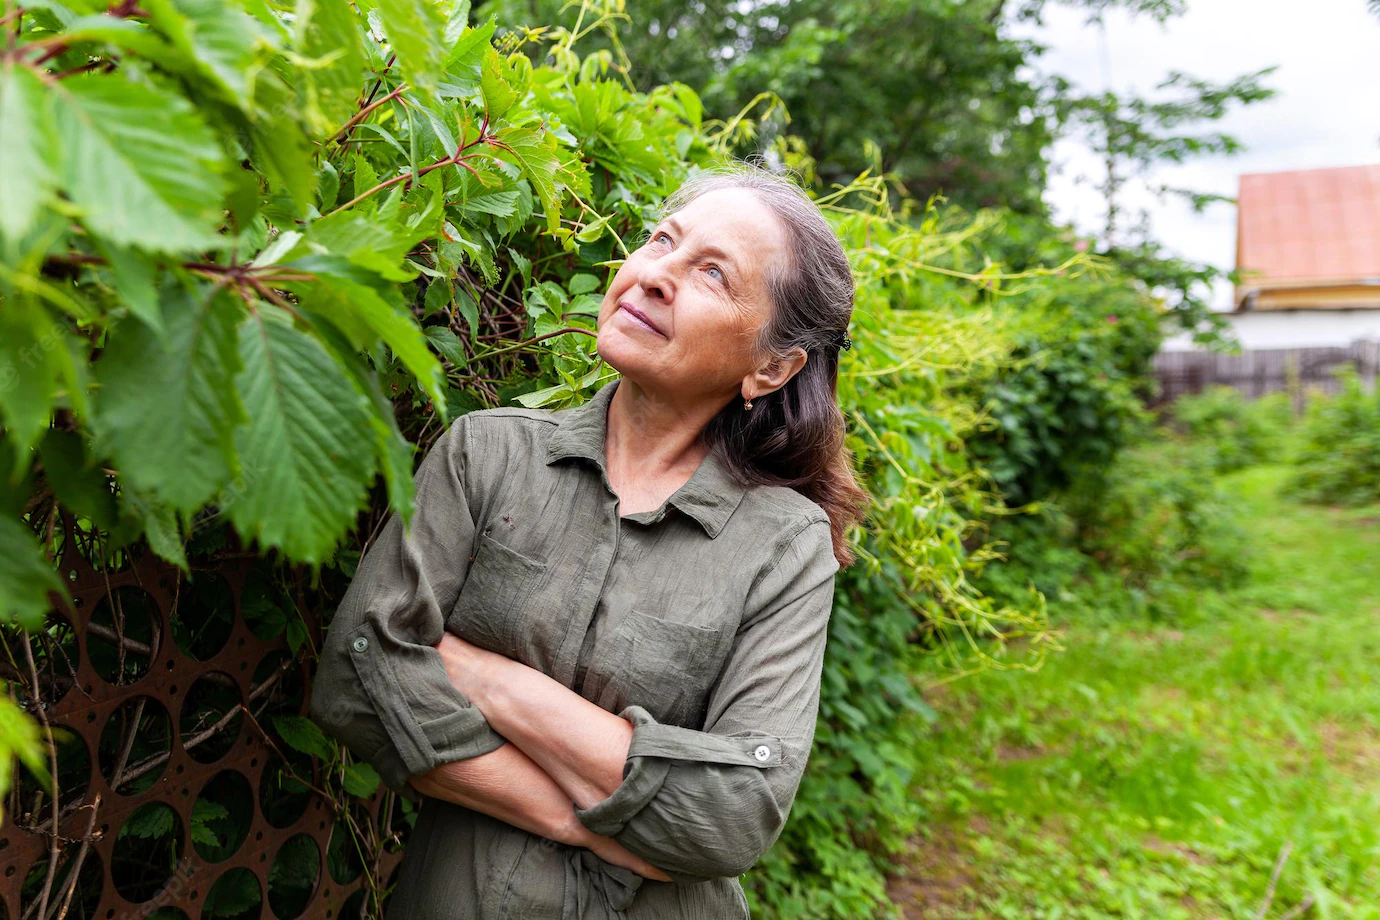 Image of a mature woman deep in thought in her garden